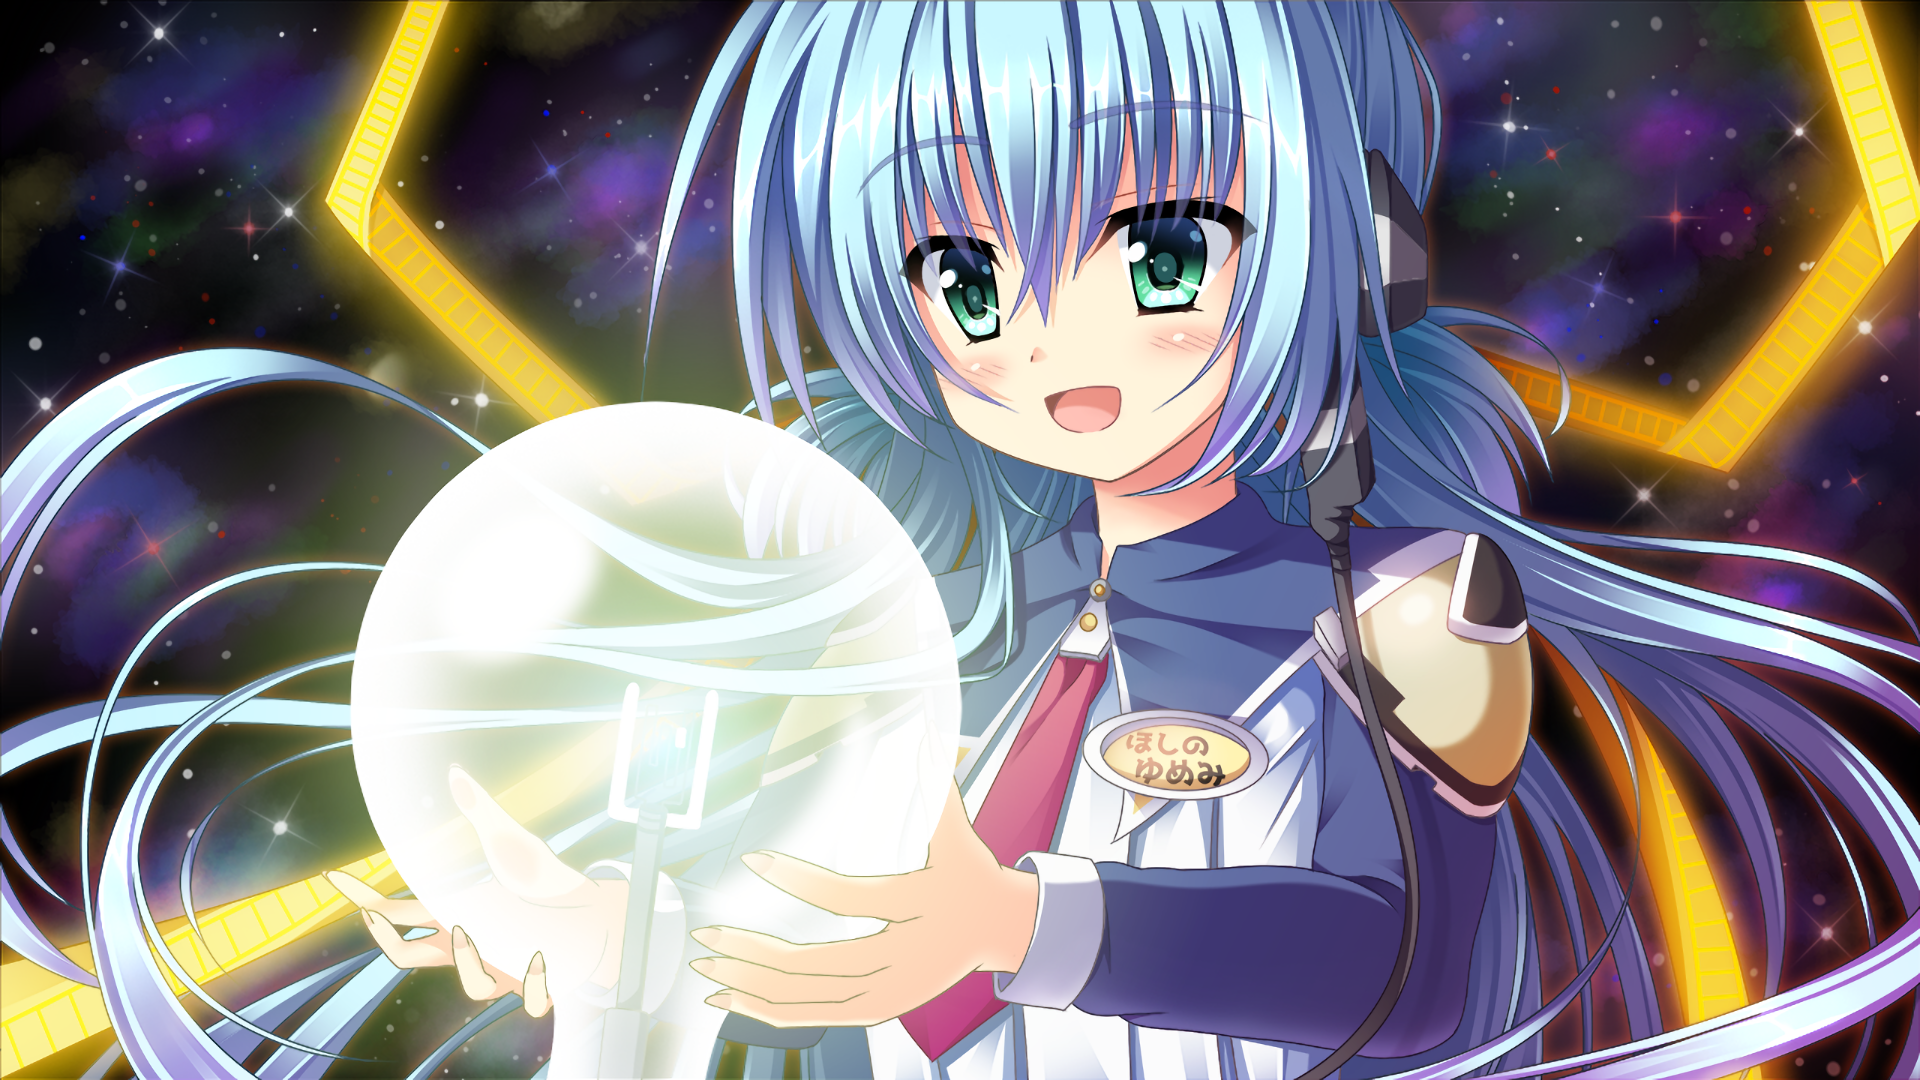 Planetarian The Reverie Of A Little Planet Wallpapers Anime Hq Planetarian The Reverie Of A Little Planet Pictures 4k Wallpapers 2019